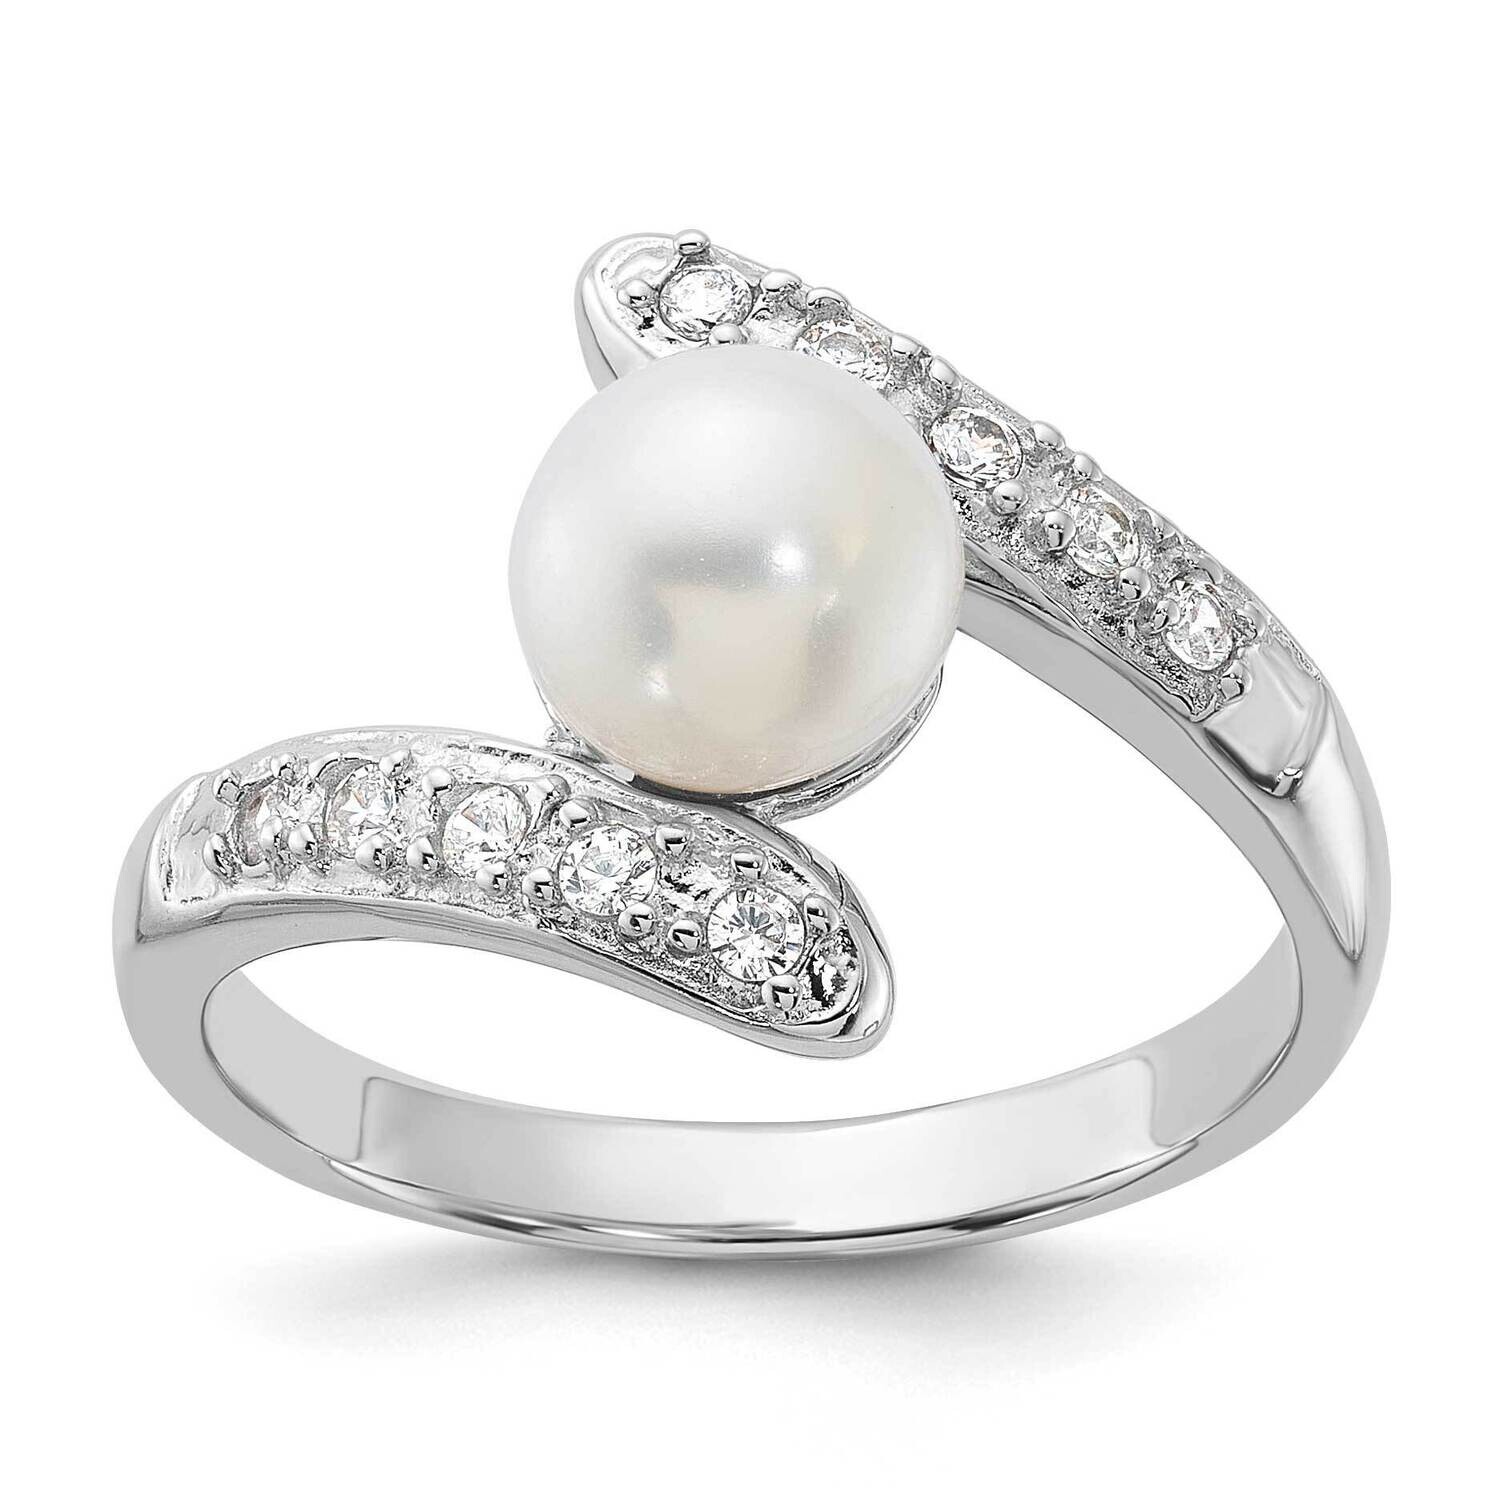 6-7mm White Fwc Pearl CZ Bypass Ring Sterling Silver Rhodium-Plated QR7602